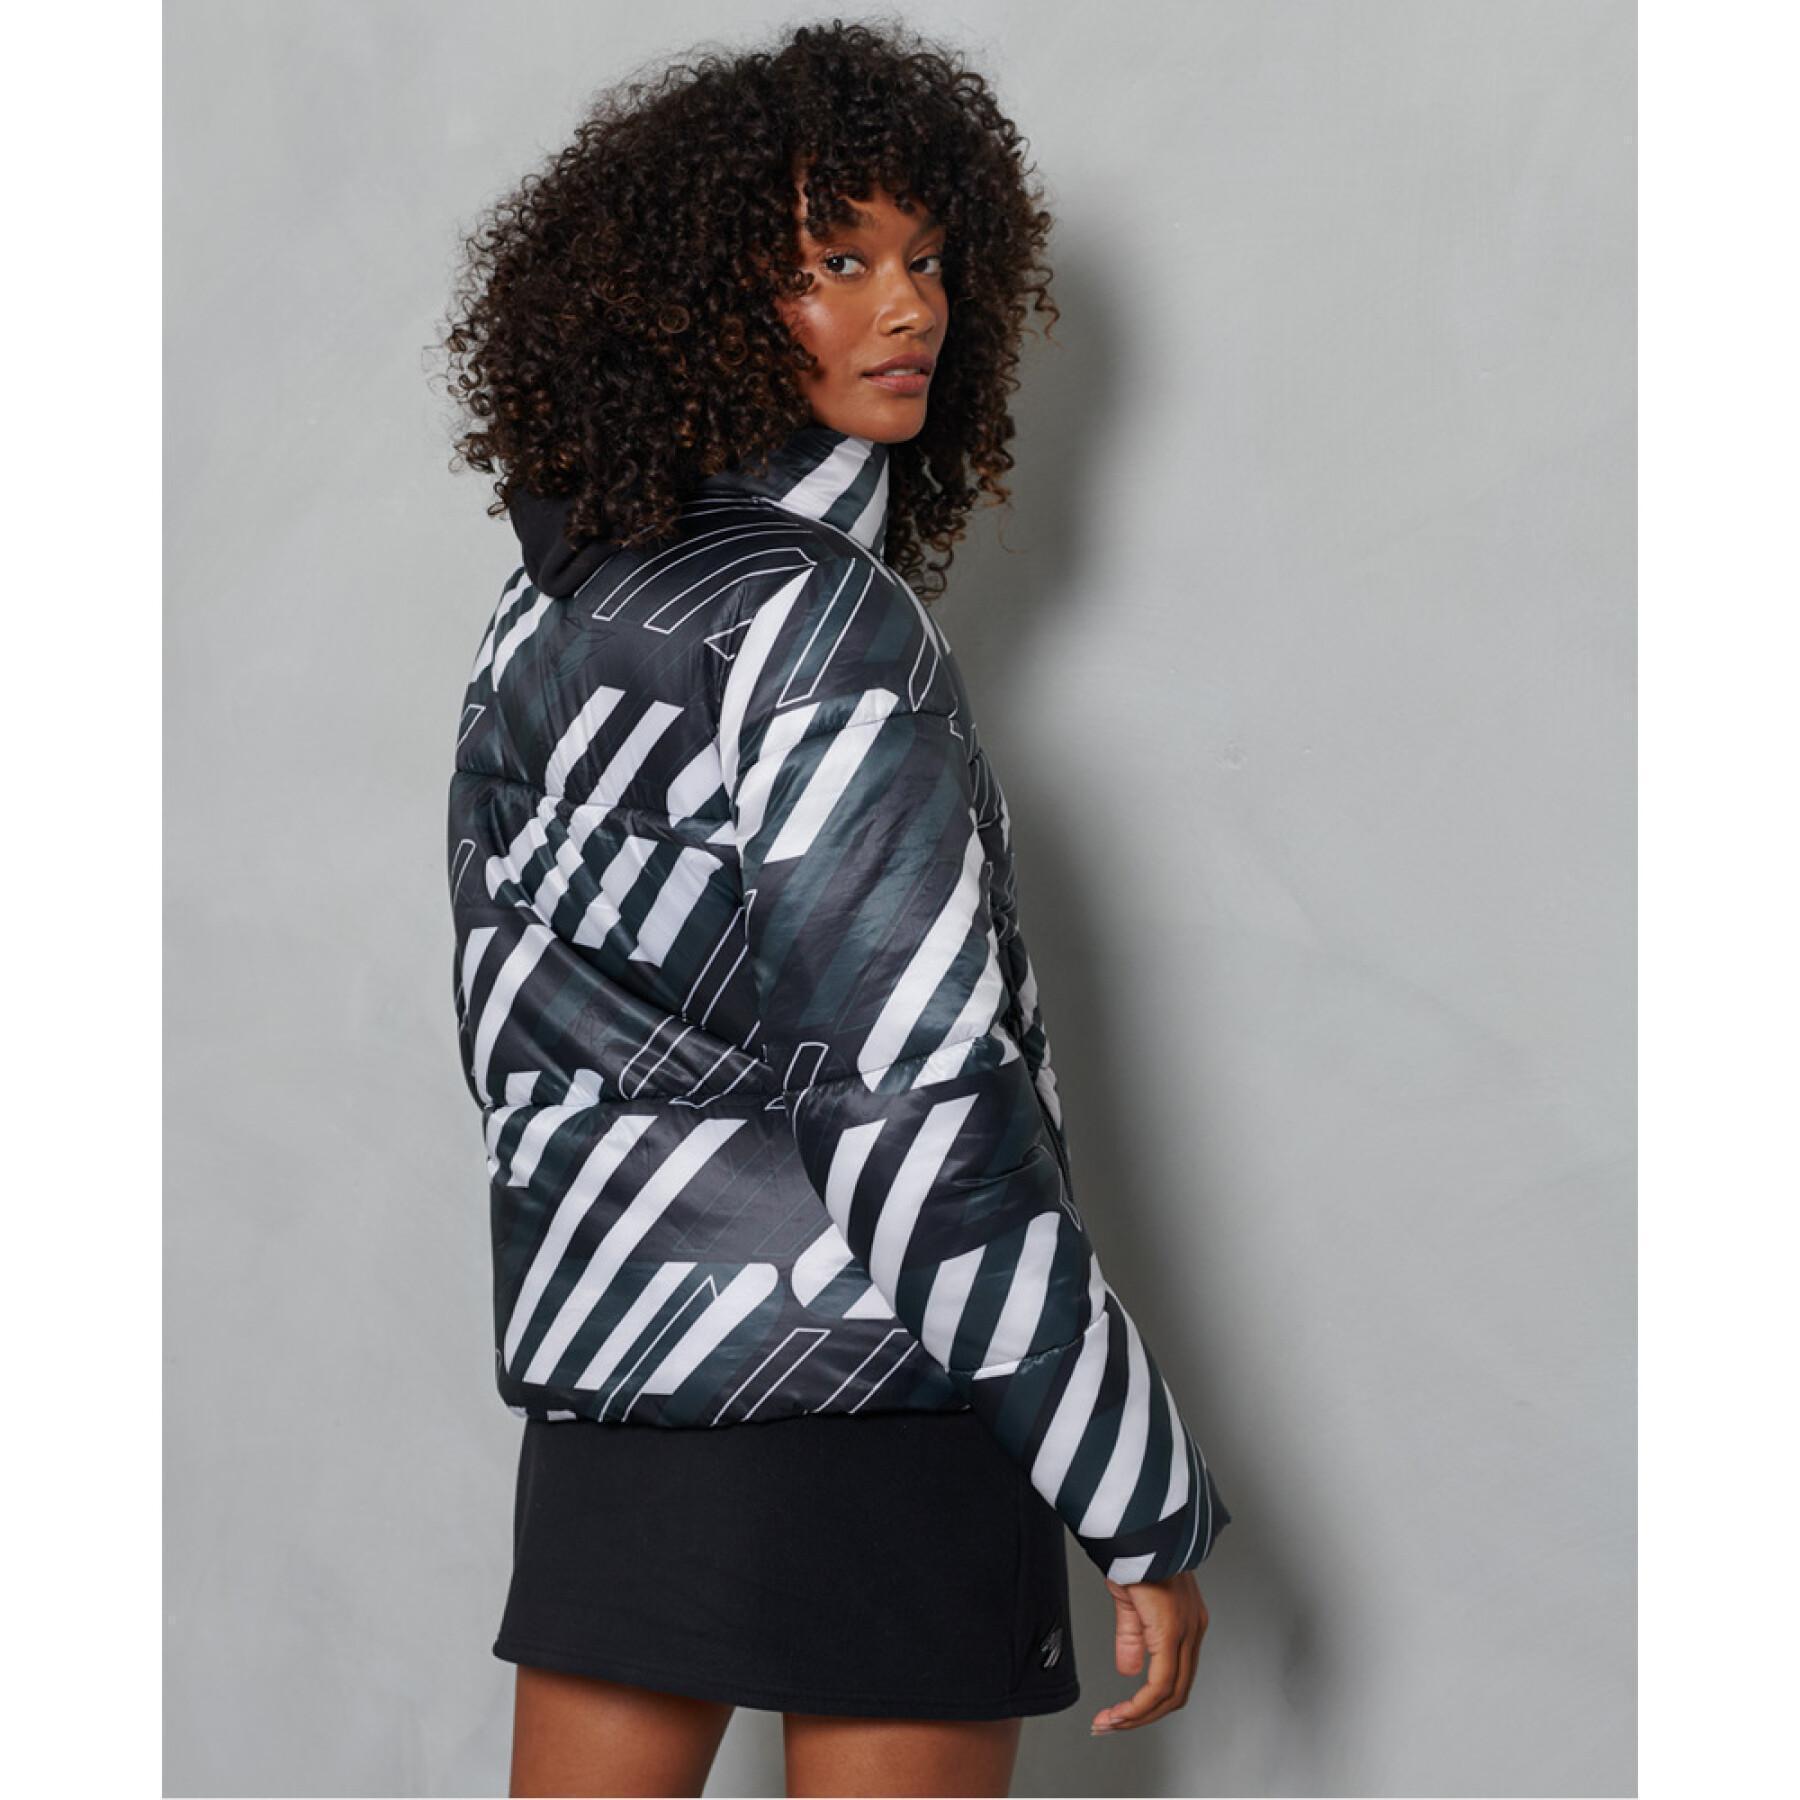 Chaqueta de plumón para mujer Superdry Sportstyle Statement